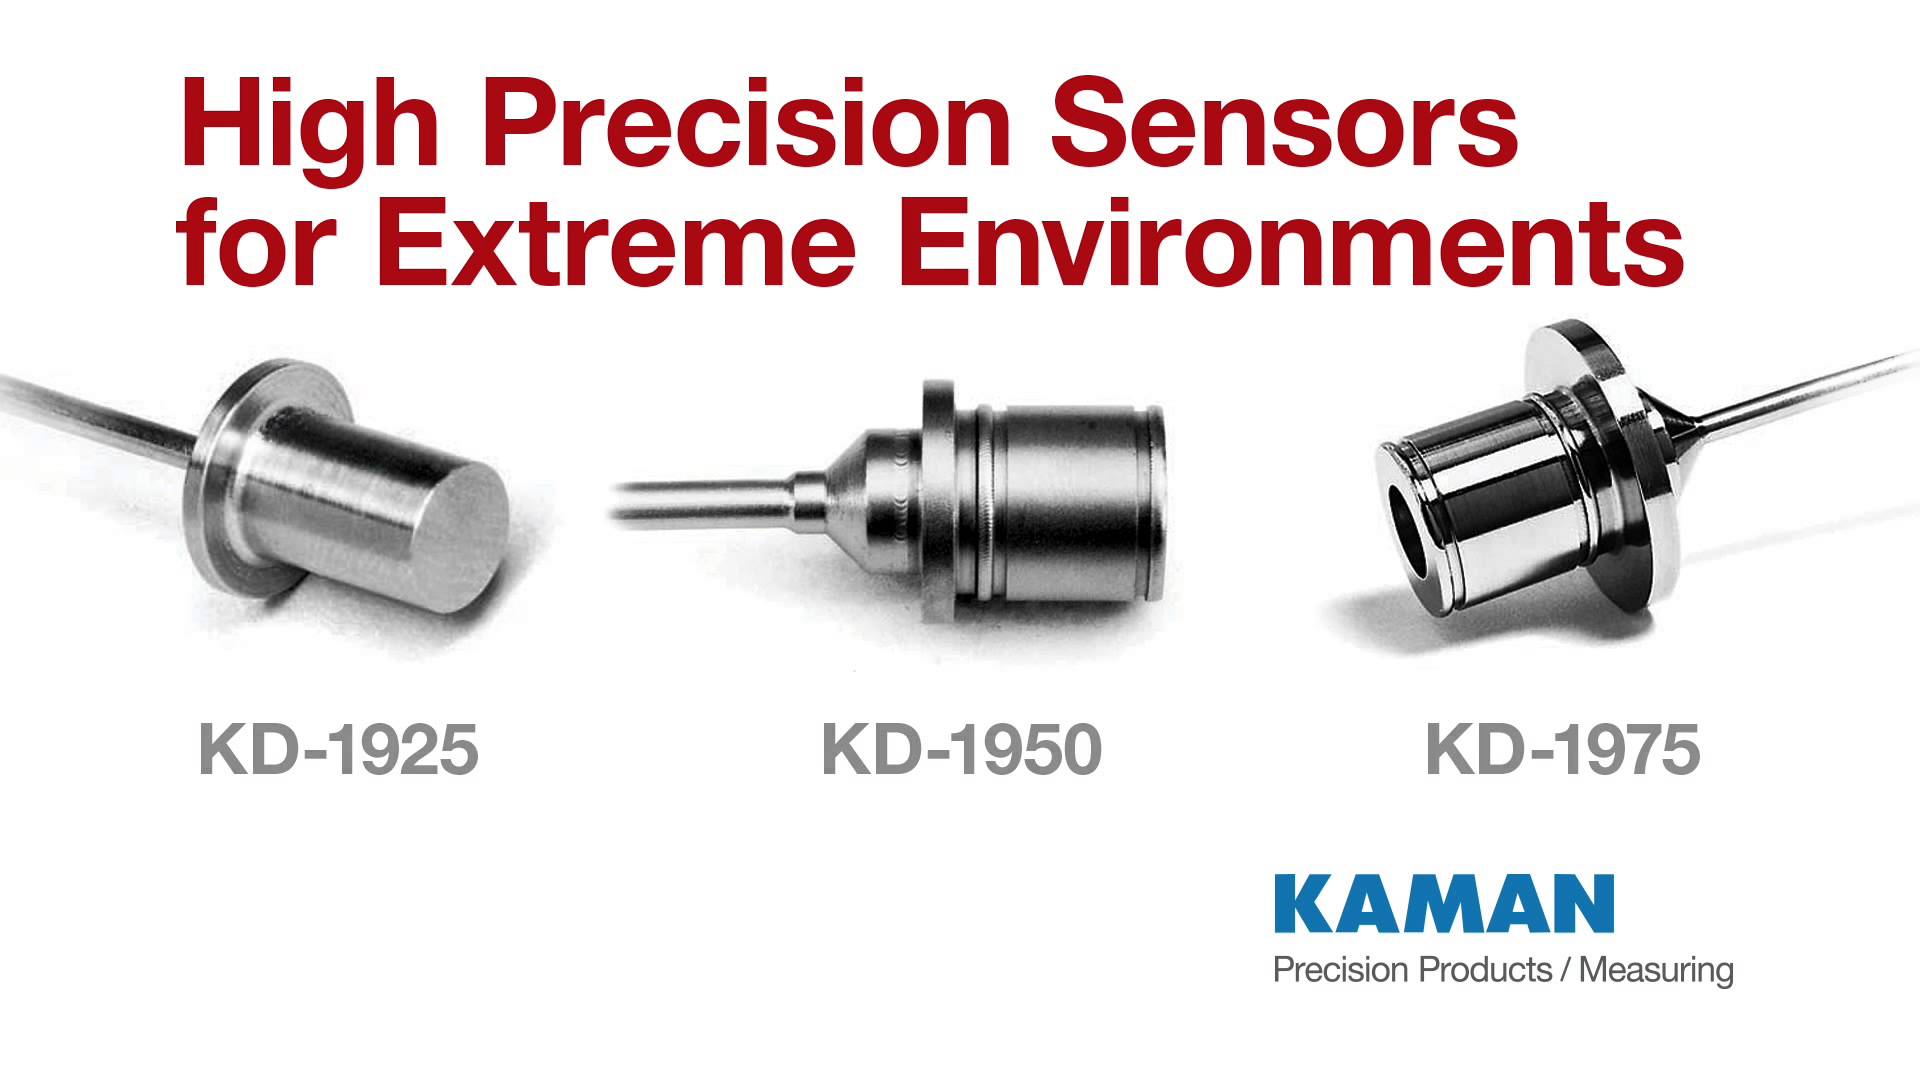 Kaman Precision Products line of Extreme Environment high-precision displacement sensors and systems 